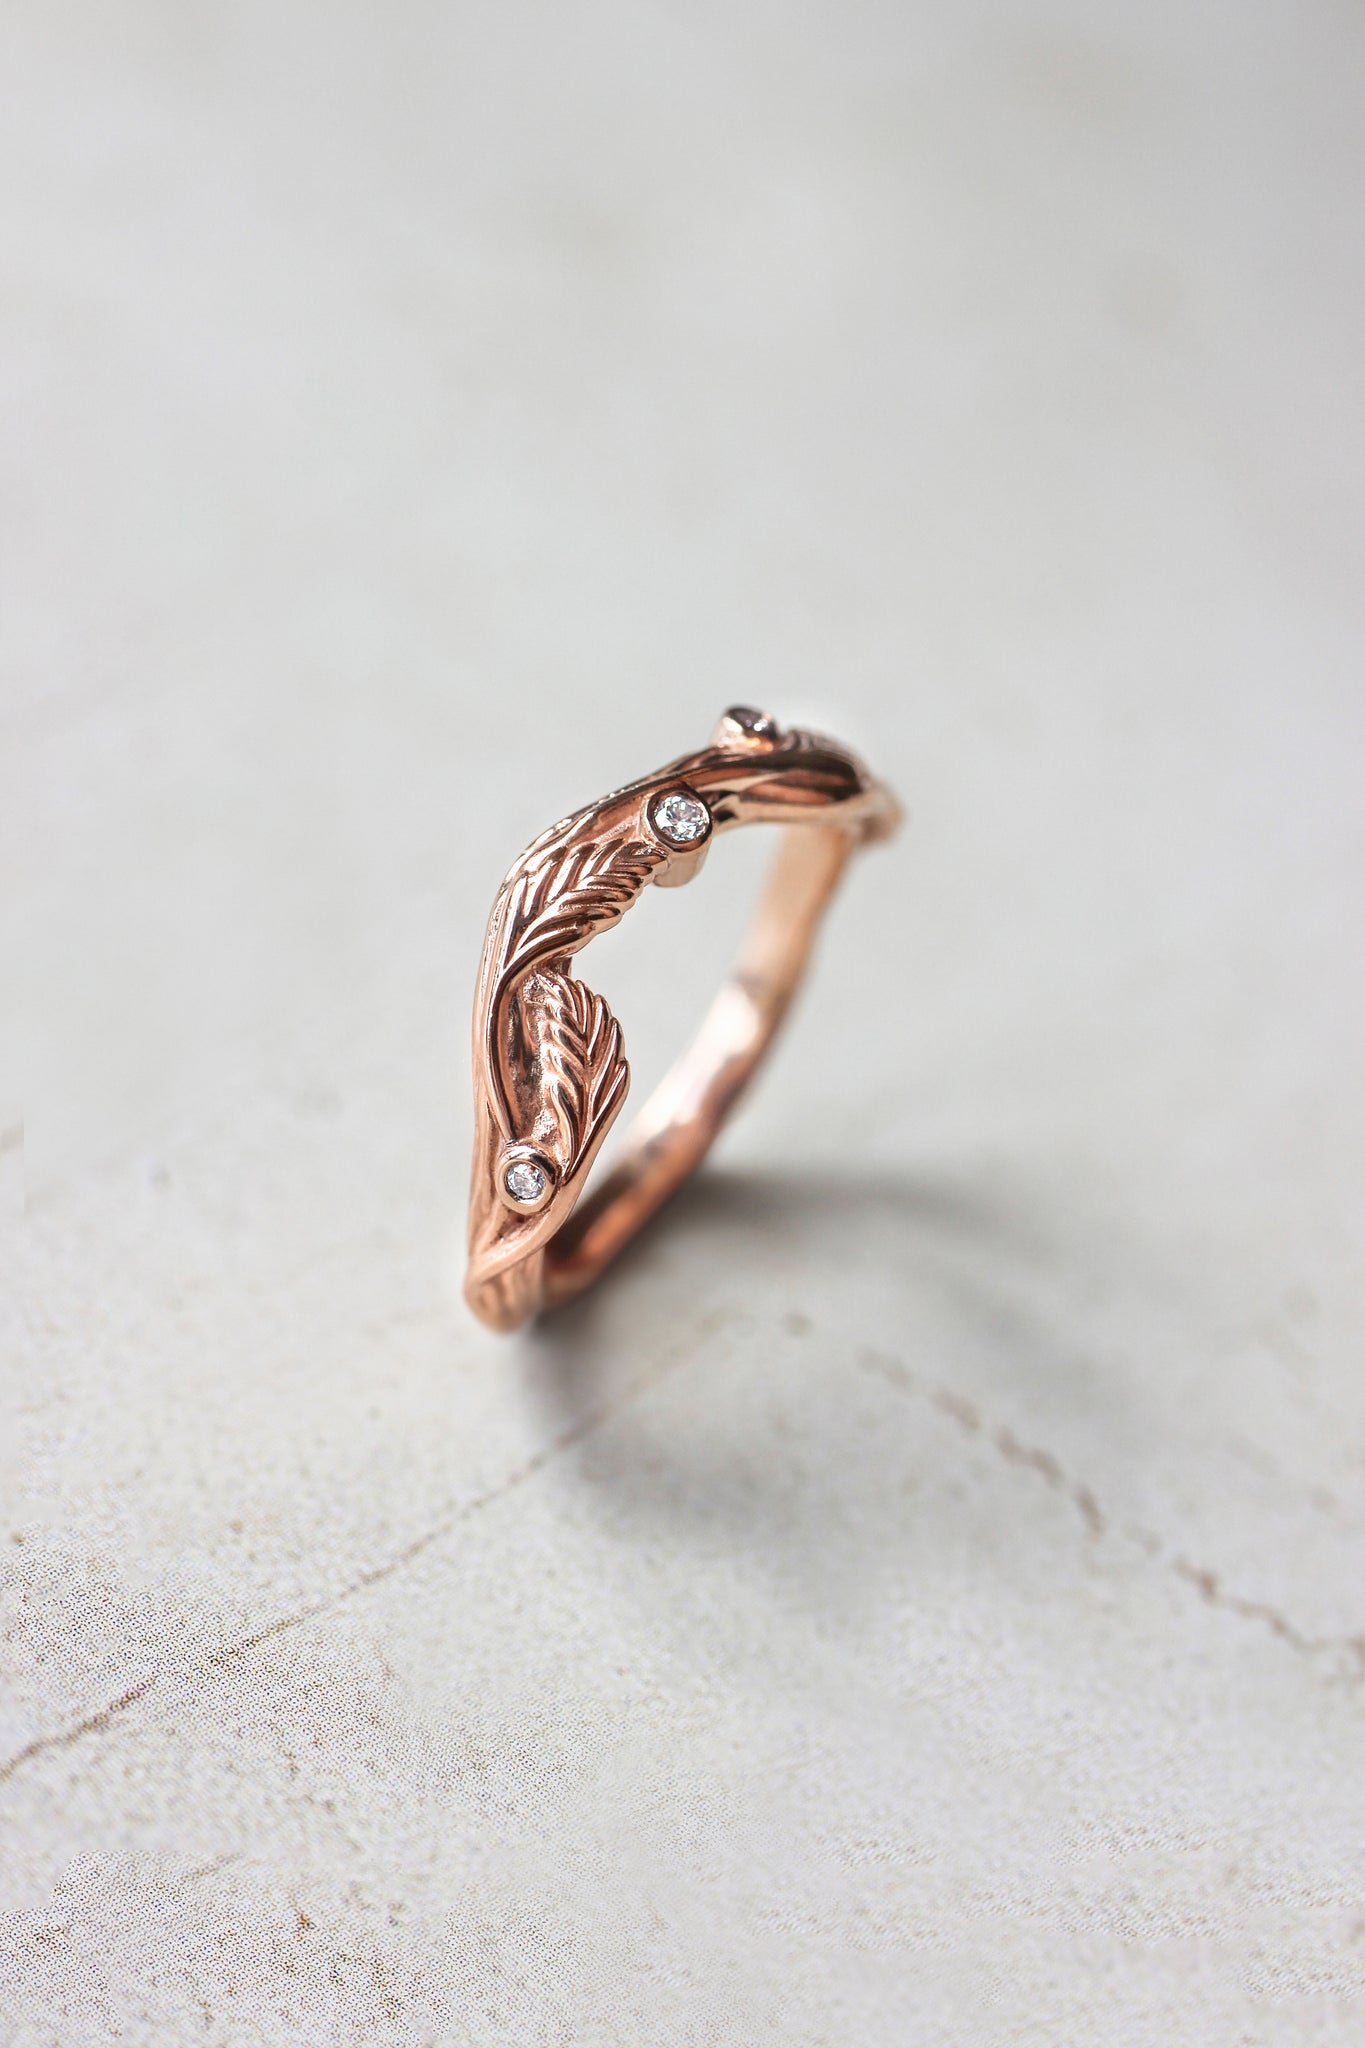 Branch ring with diamonds or moissanites, matching band for Lily of the valley - Eden Garden Jewelry™